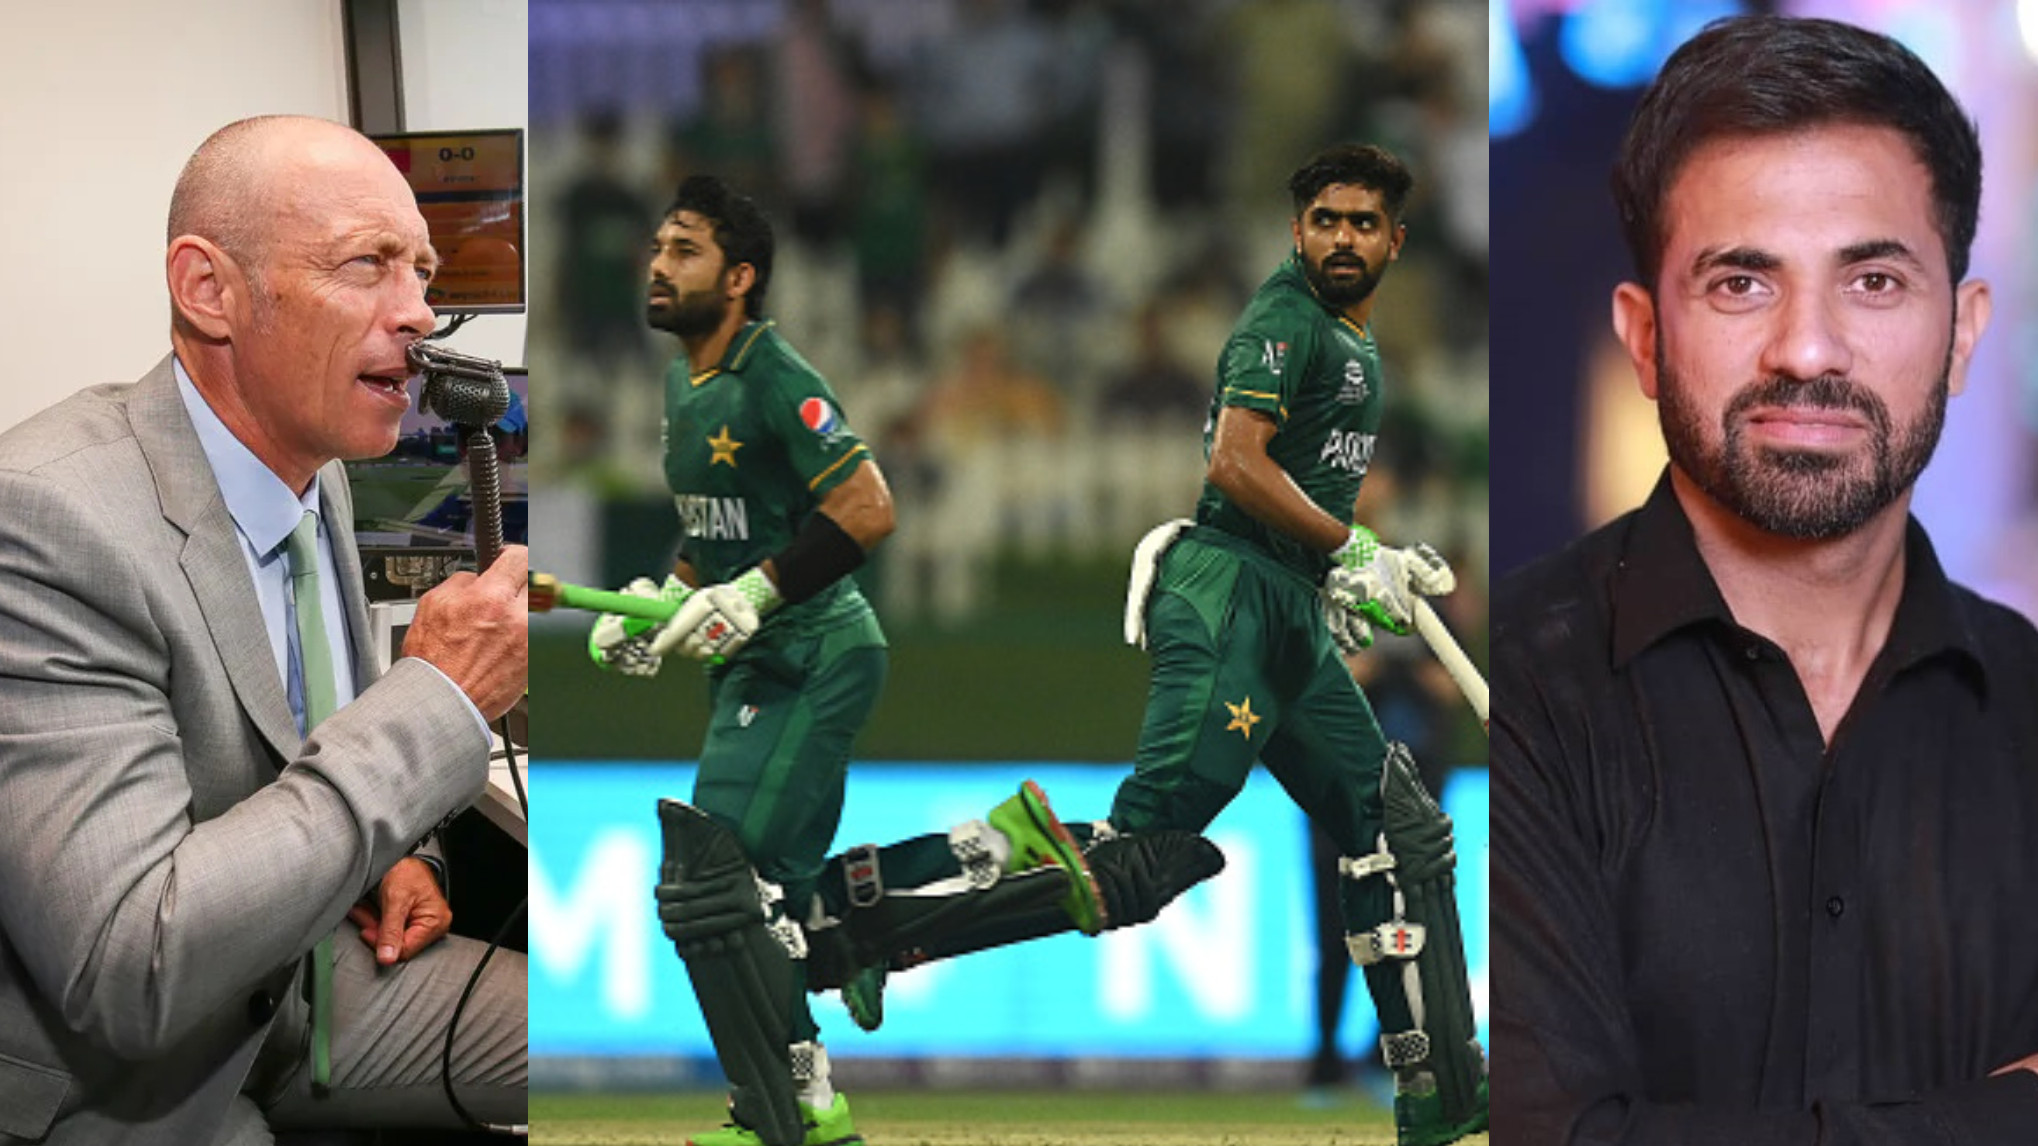 T20 World Cup 2021: Cricket fraternity reacts as Azam-Rizwan combo puts Pakistan into semifinals